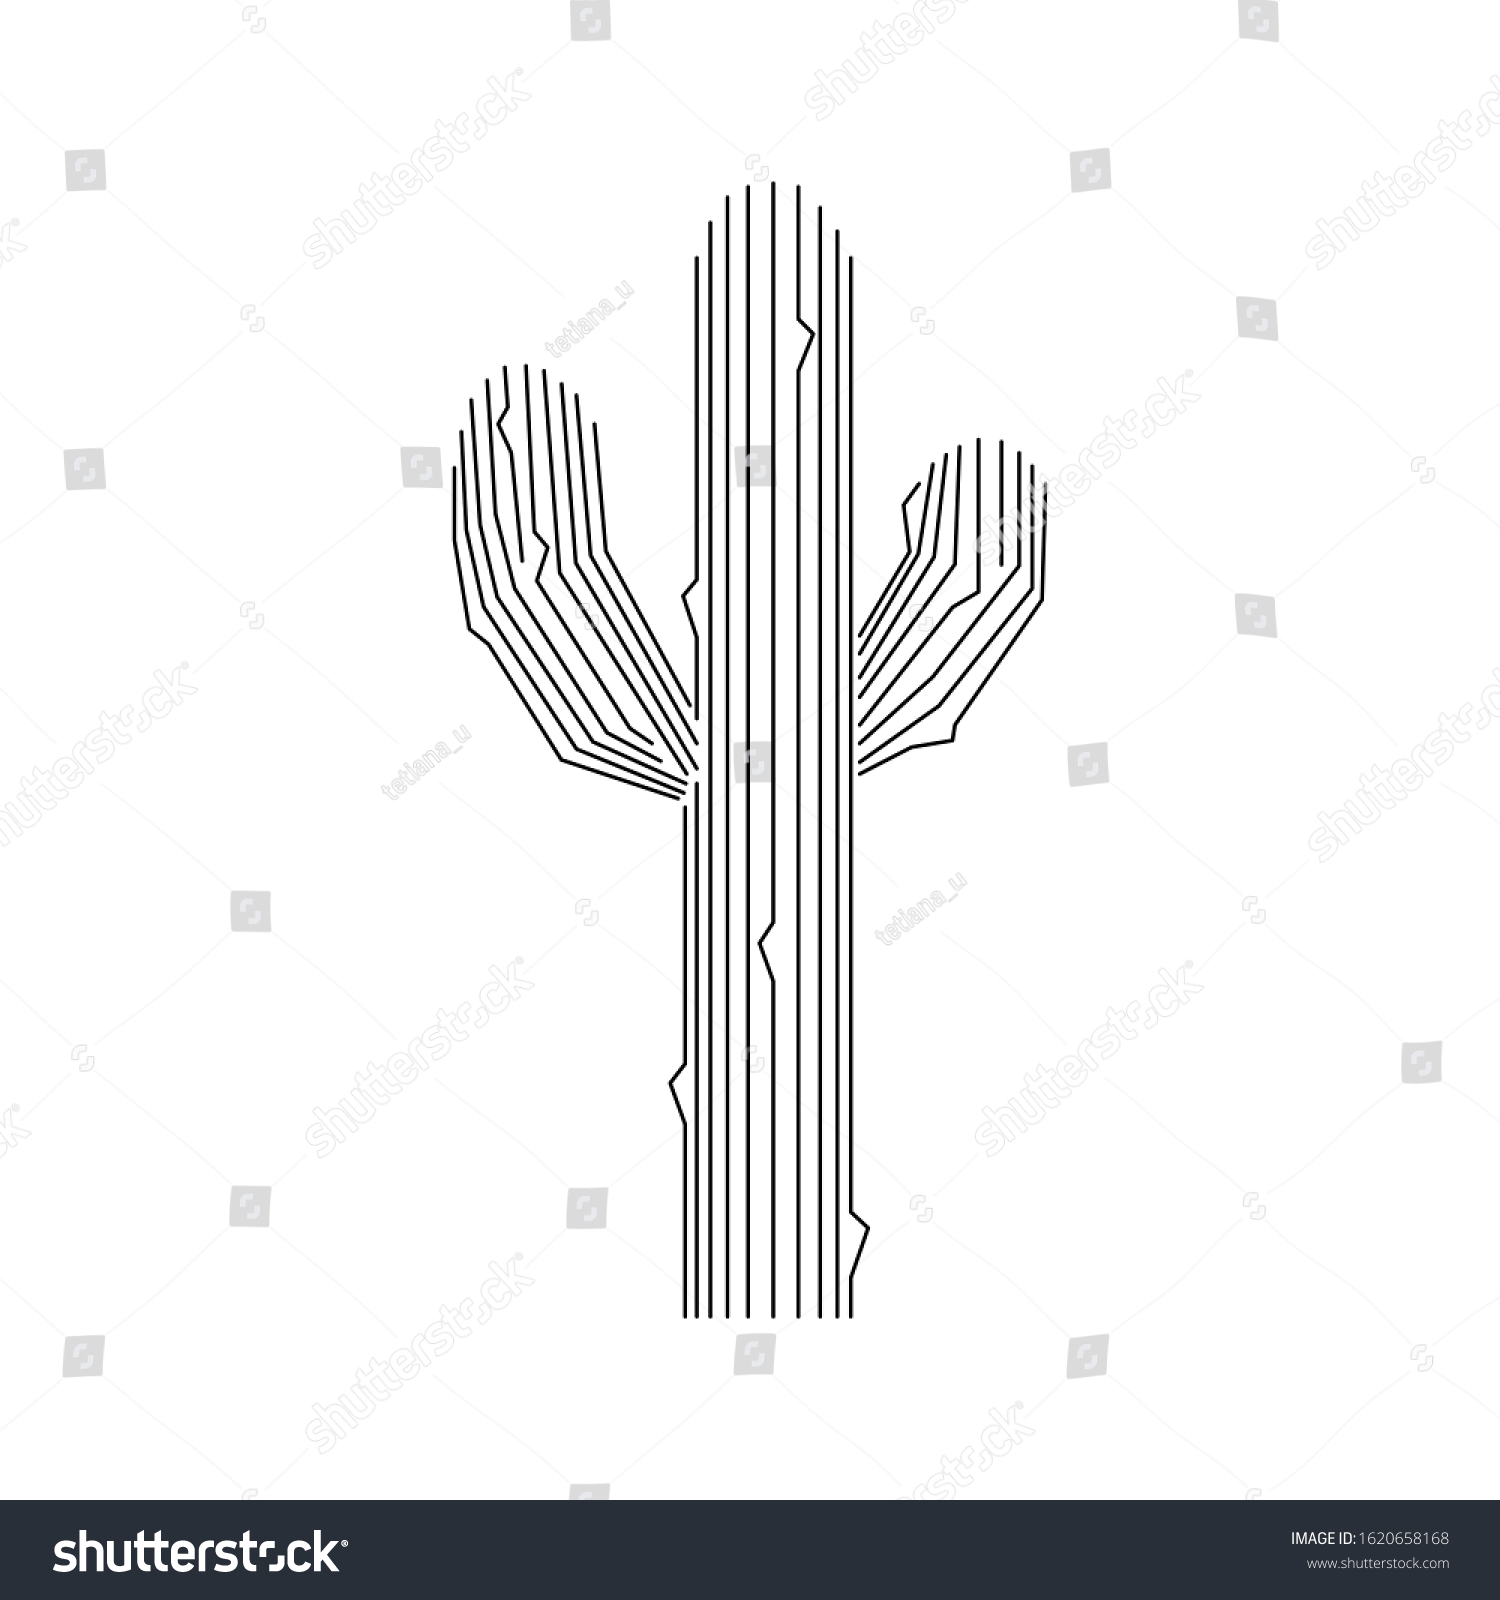 SVG of Spiny cactus design. Black lines isolated on white background. Vector illustration svg